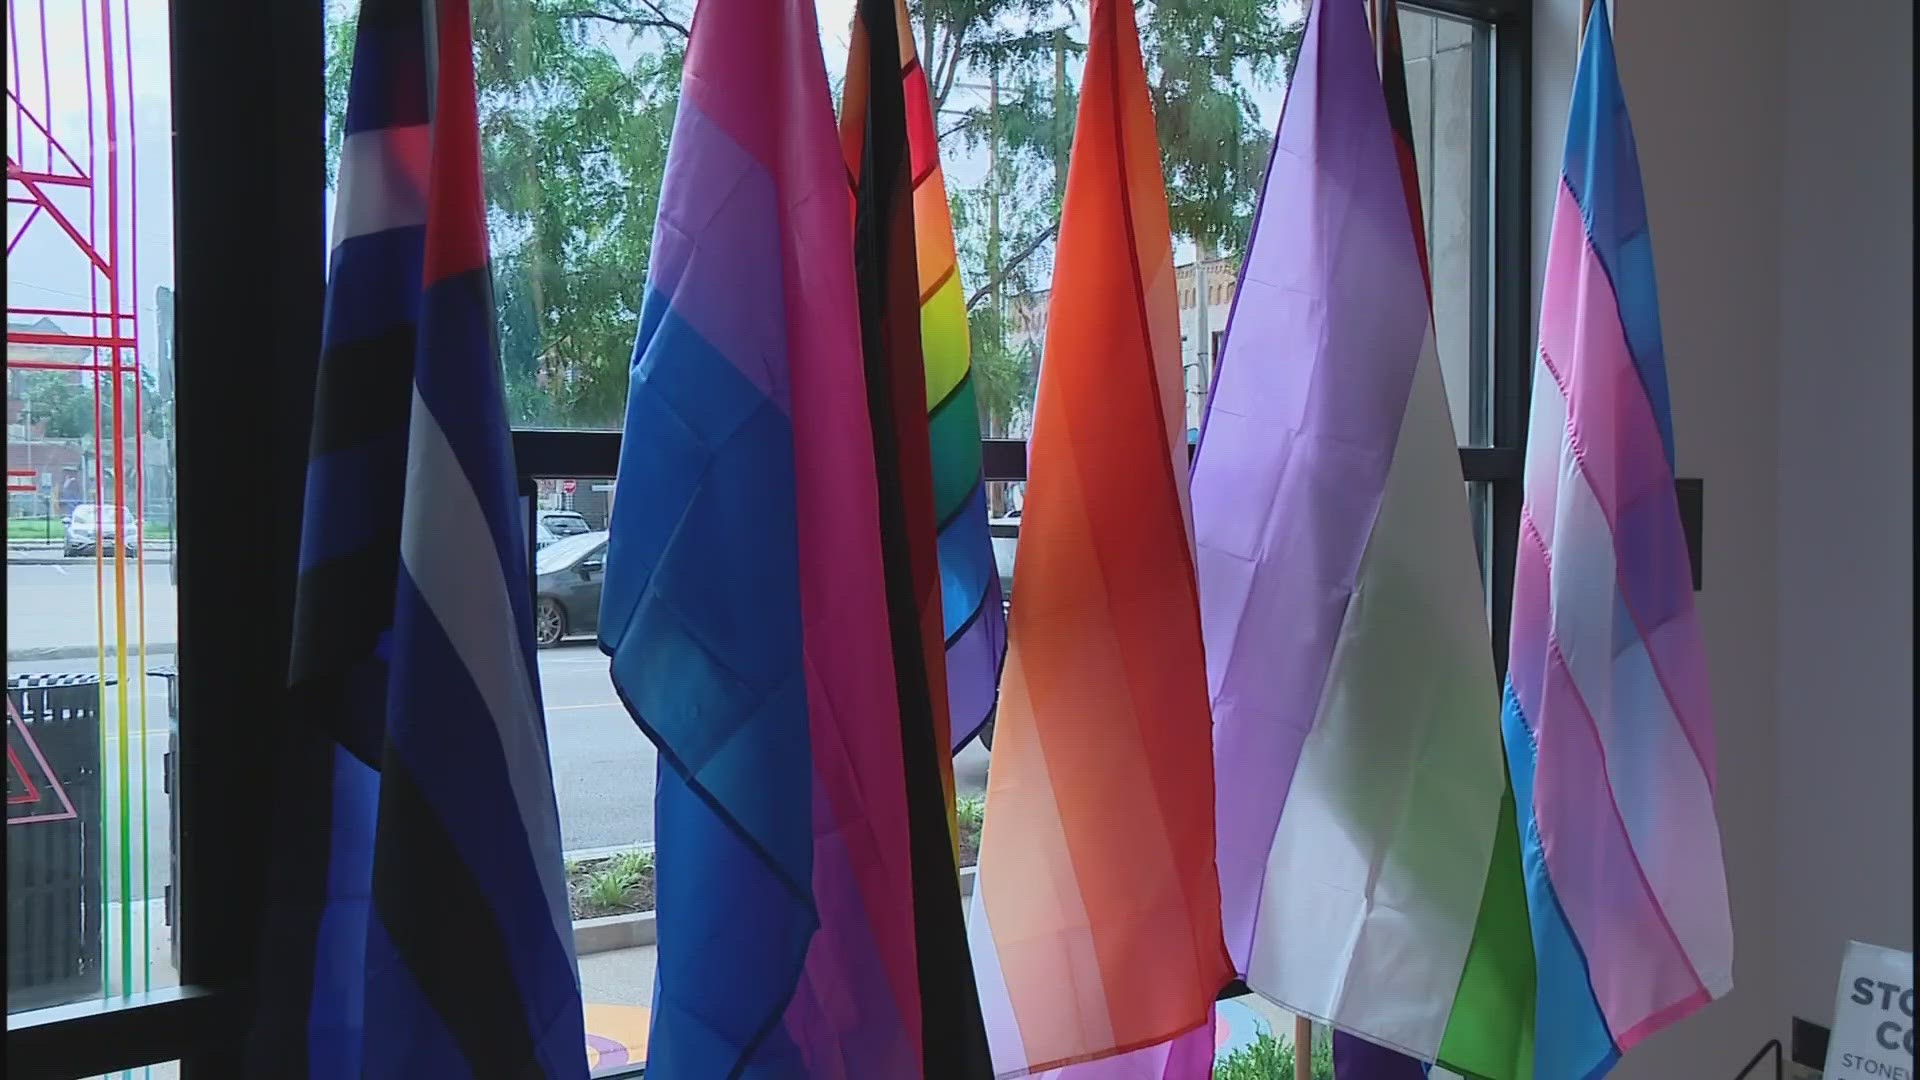 Organizations like Stonewall Columbus say their goal is to create a welcoming and inclusive environment where everyone can express themselves without fear.